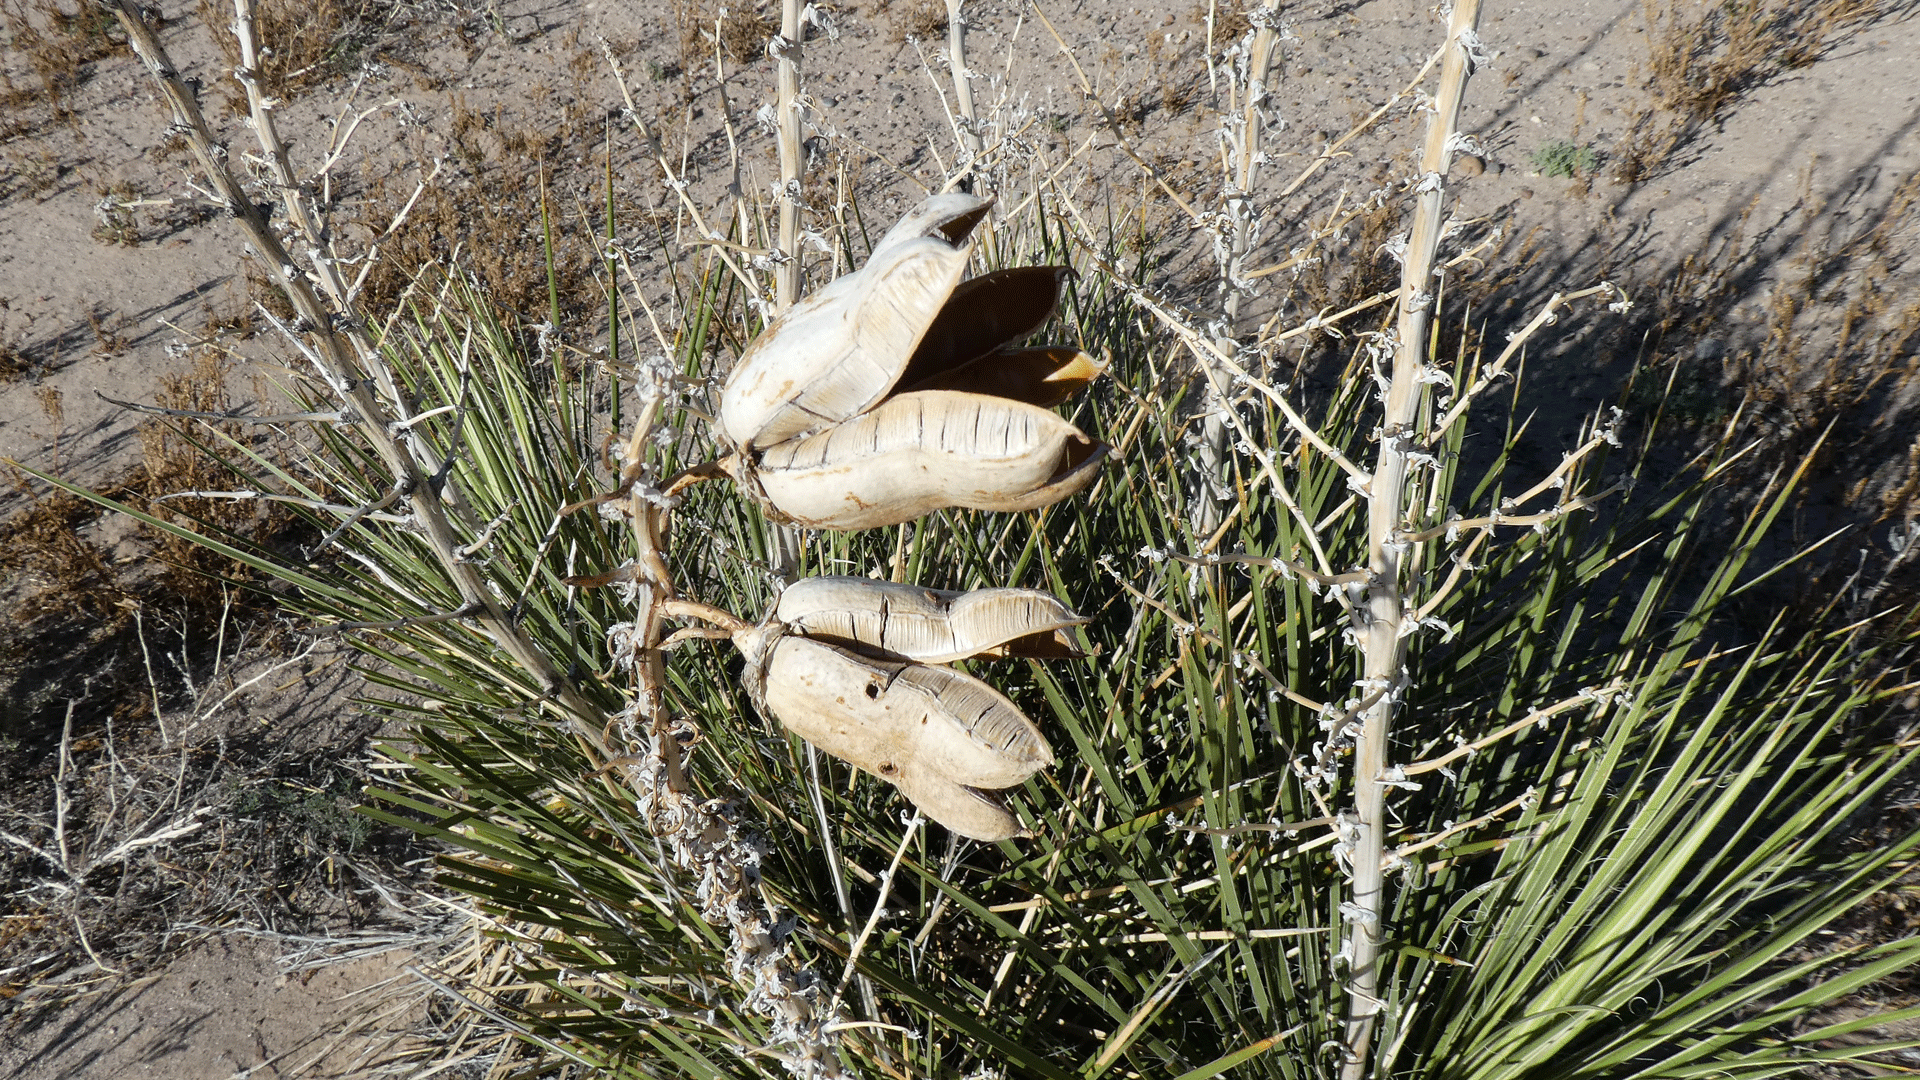 The previous year's seed pods, Albuquerque, July 2020